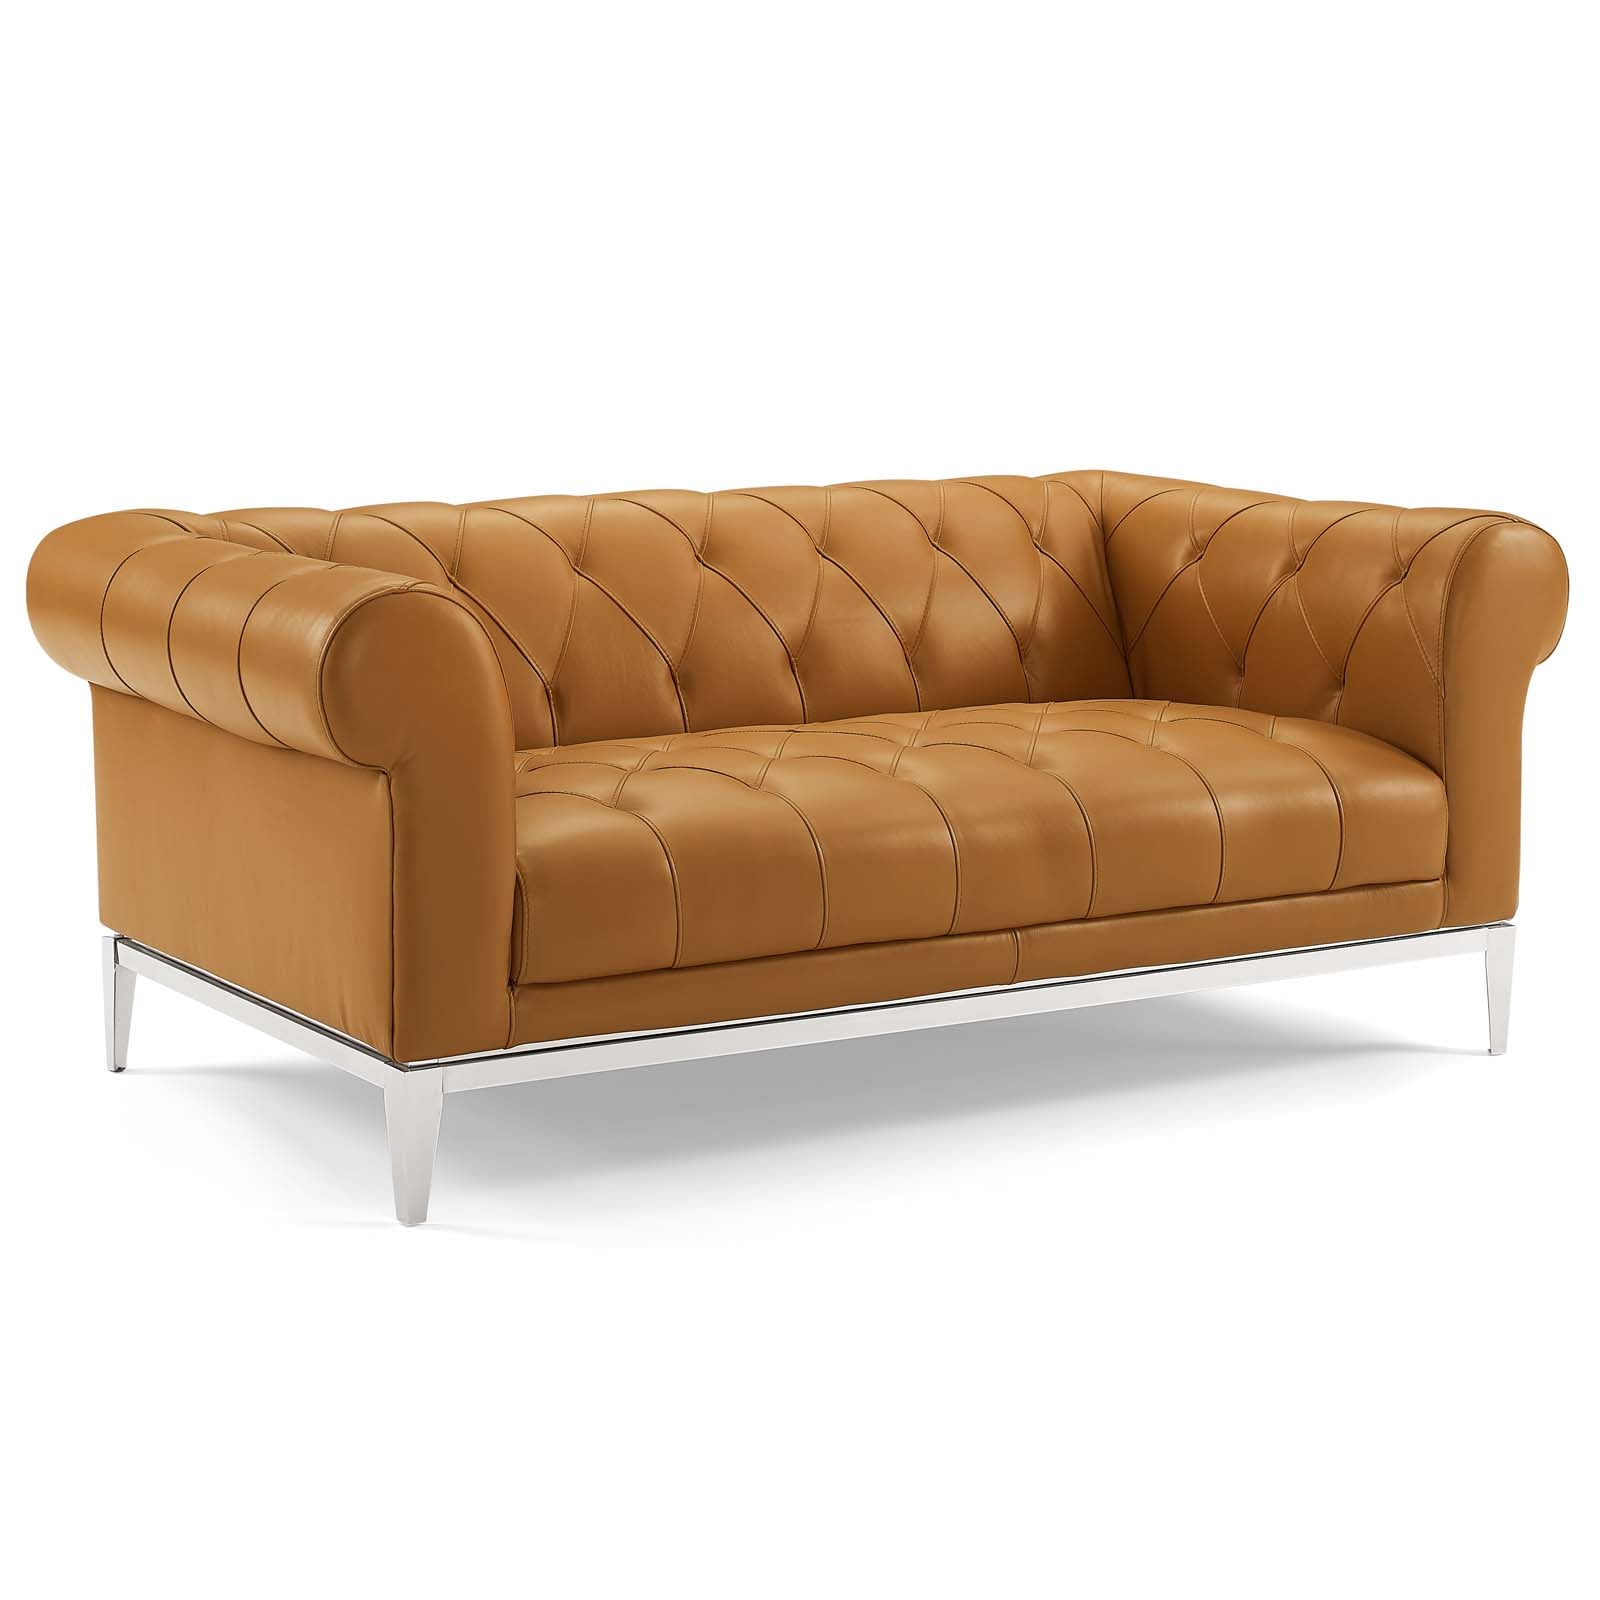 Modway Loveseats - Idyll-Tufted-Upholstered-Leather-Loveseat-and-Armchair-Tan